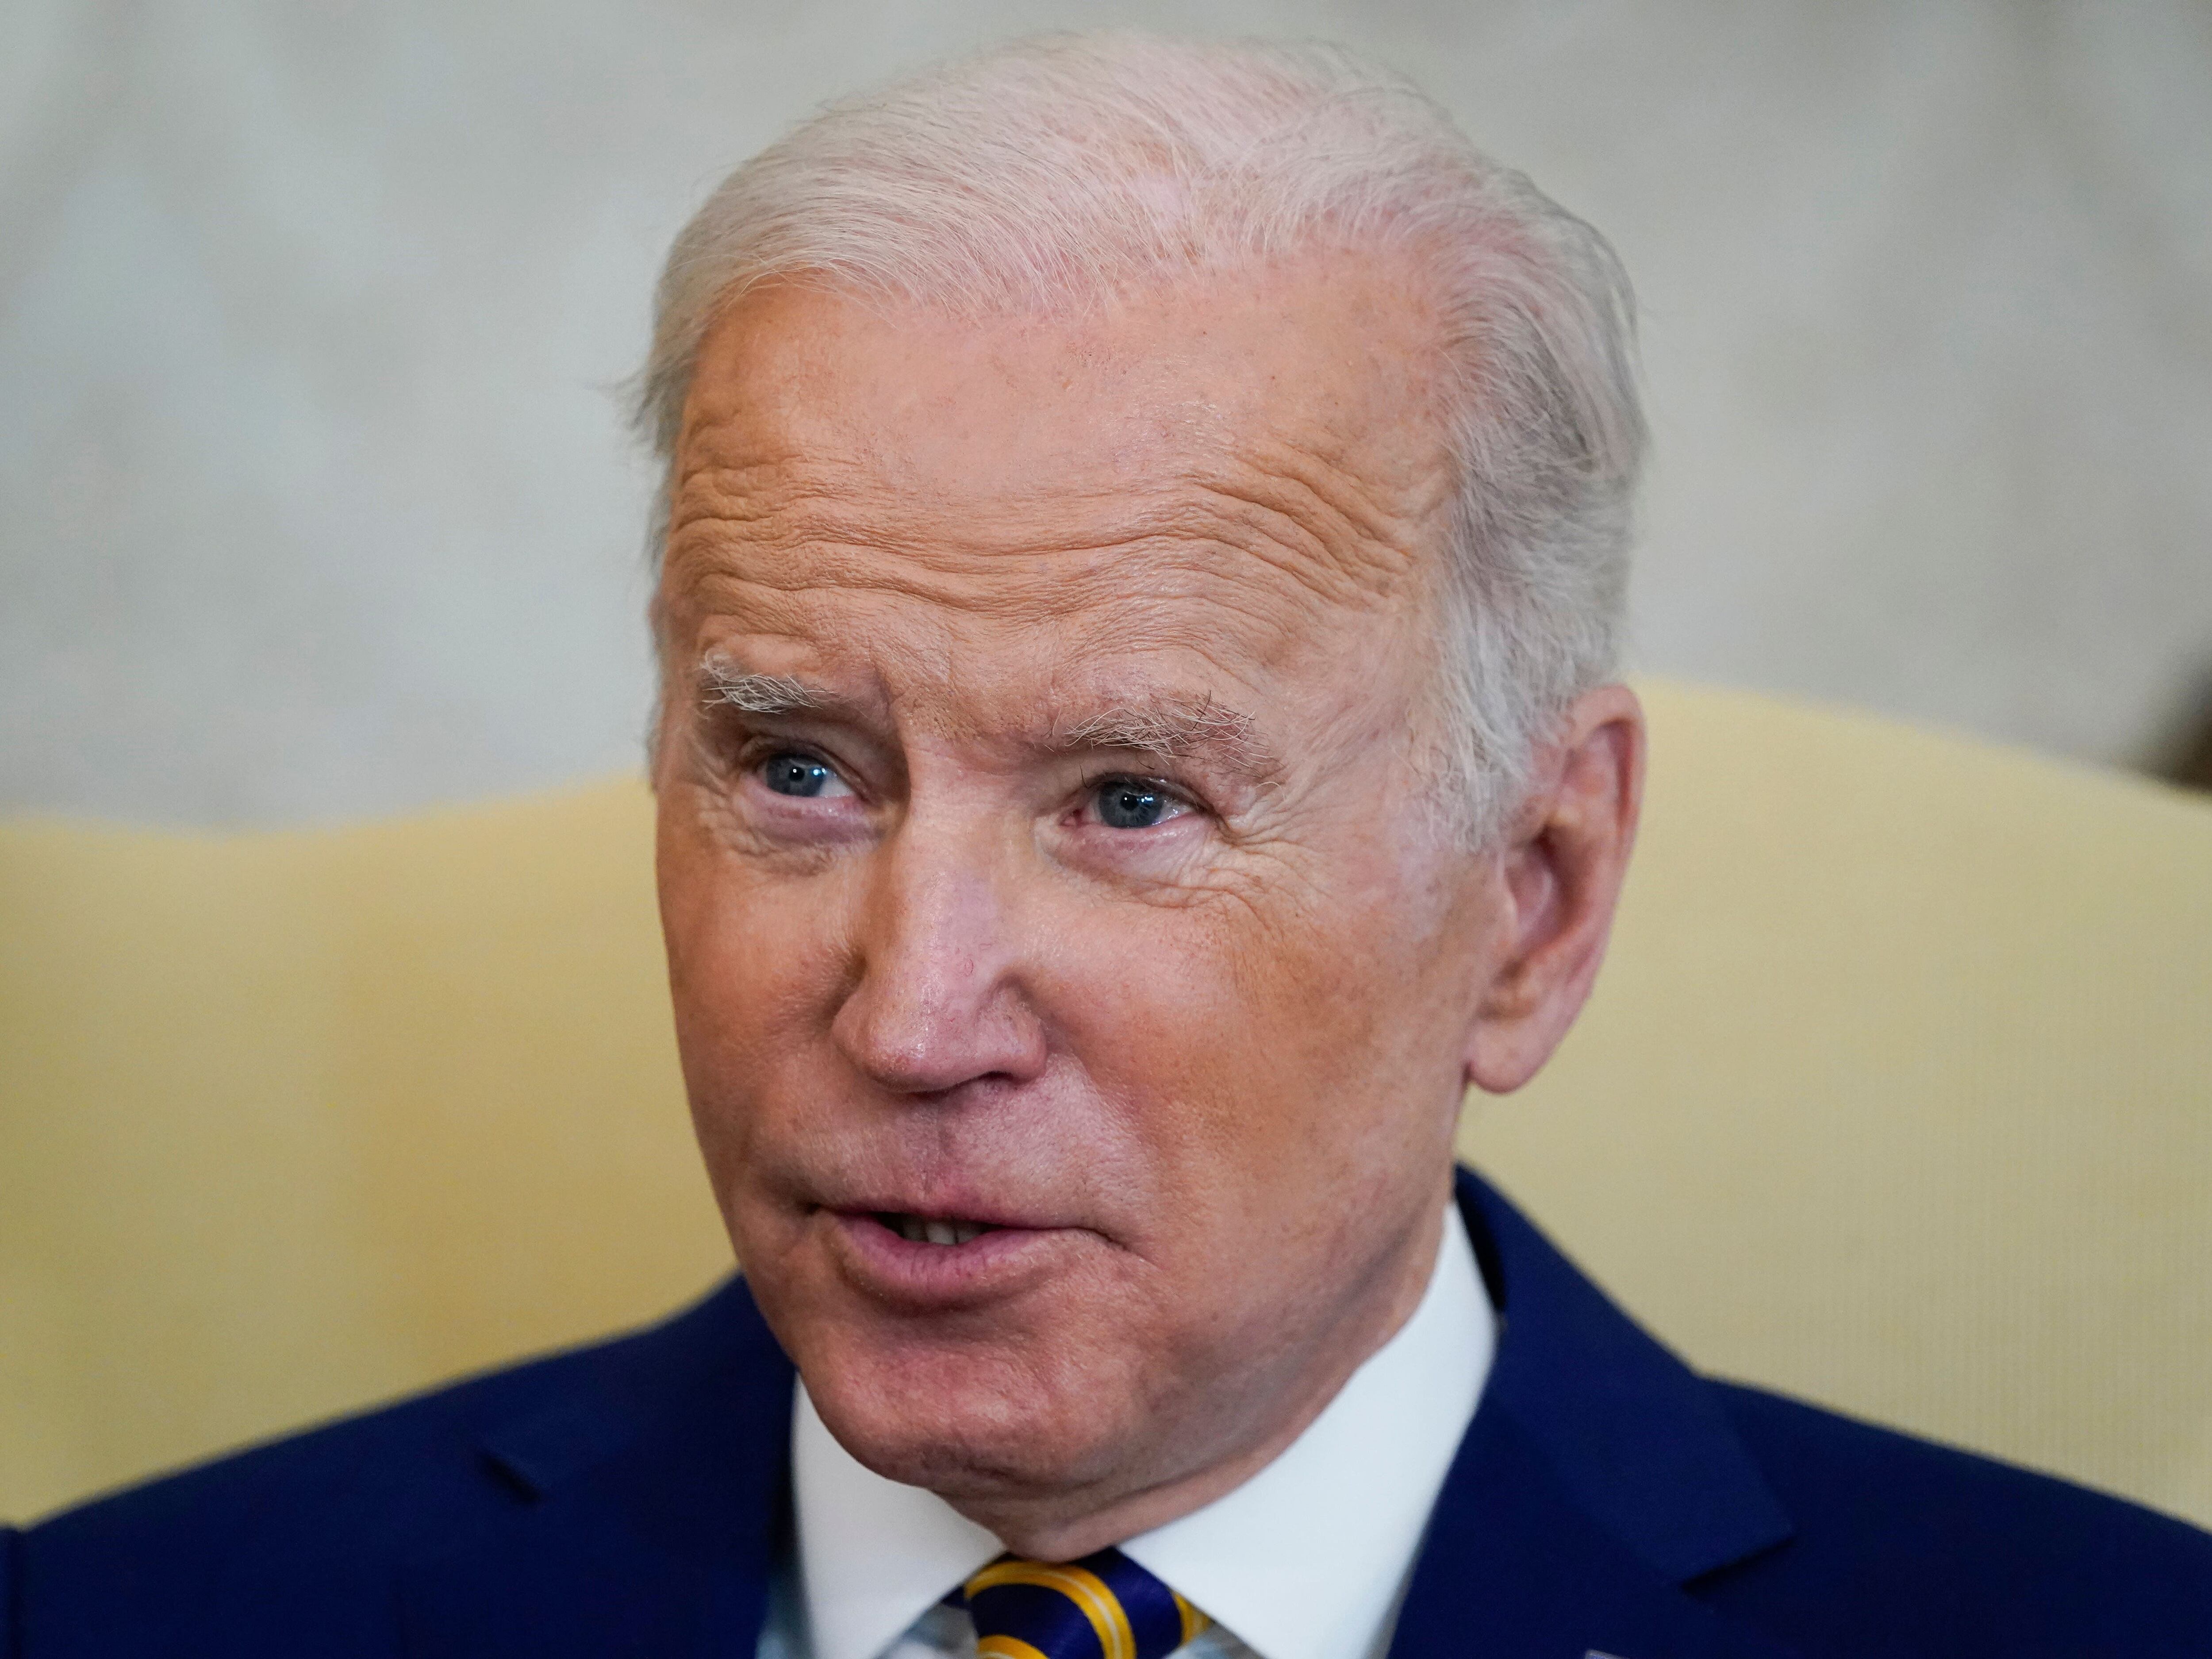 Biden sends troops to Poland, Germany and Romania as Russia tensions rise